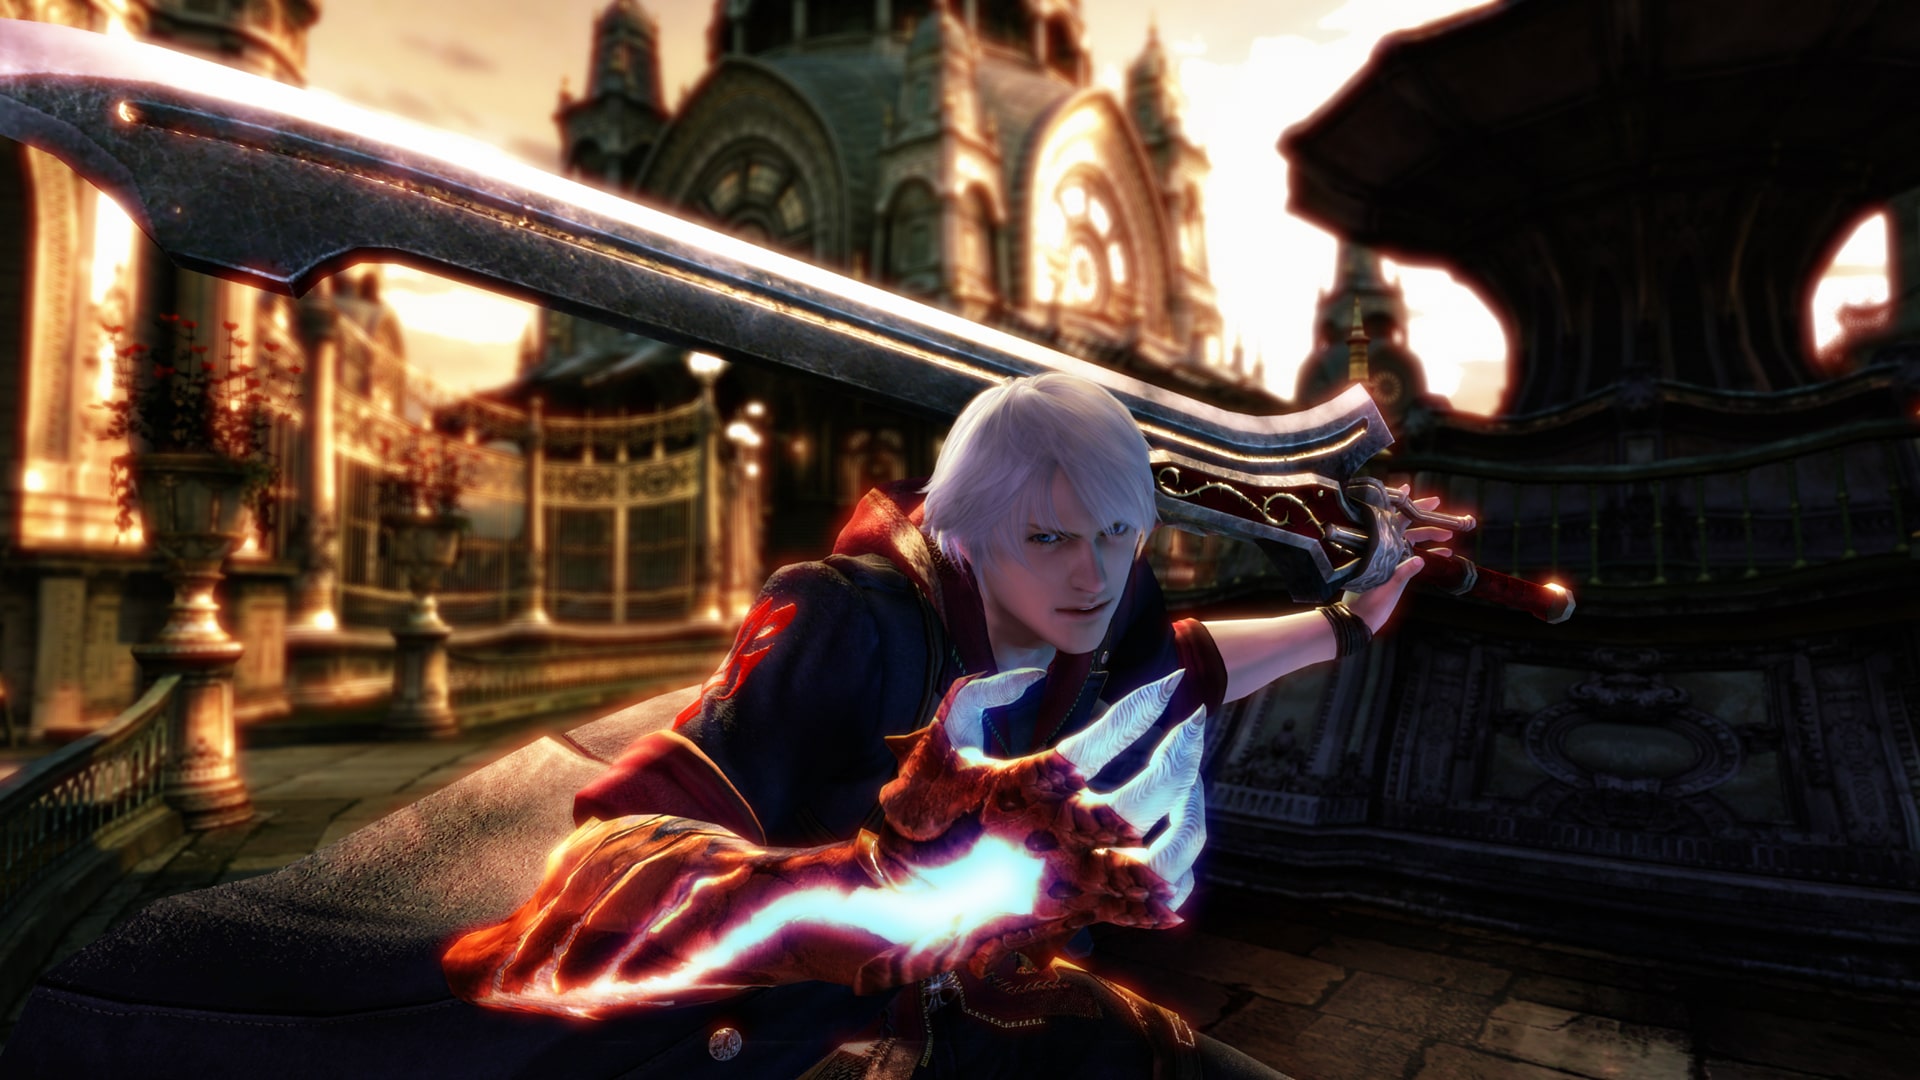 Devil May Cry 4 Special Edition - The Best (中日英文版)